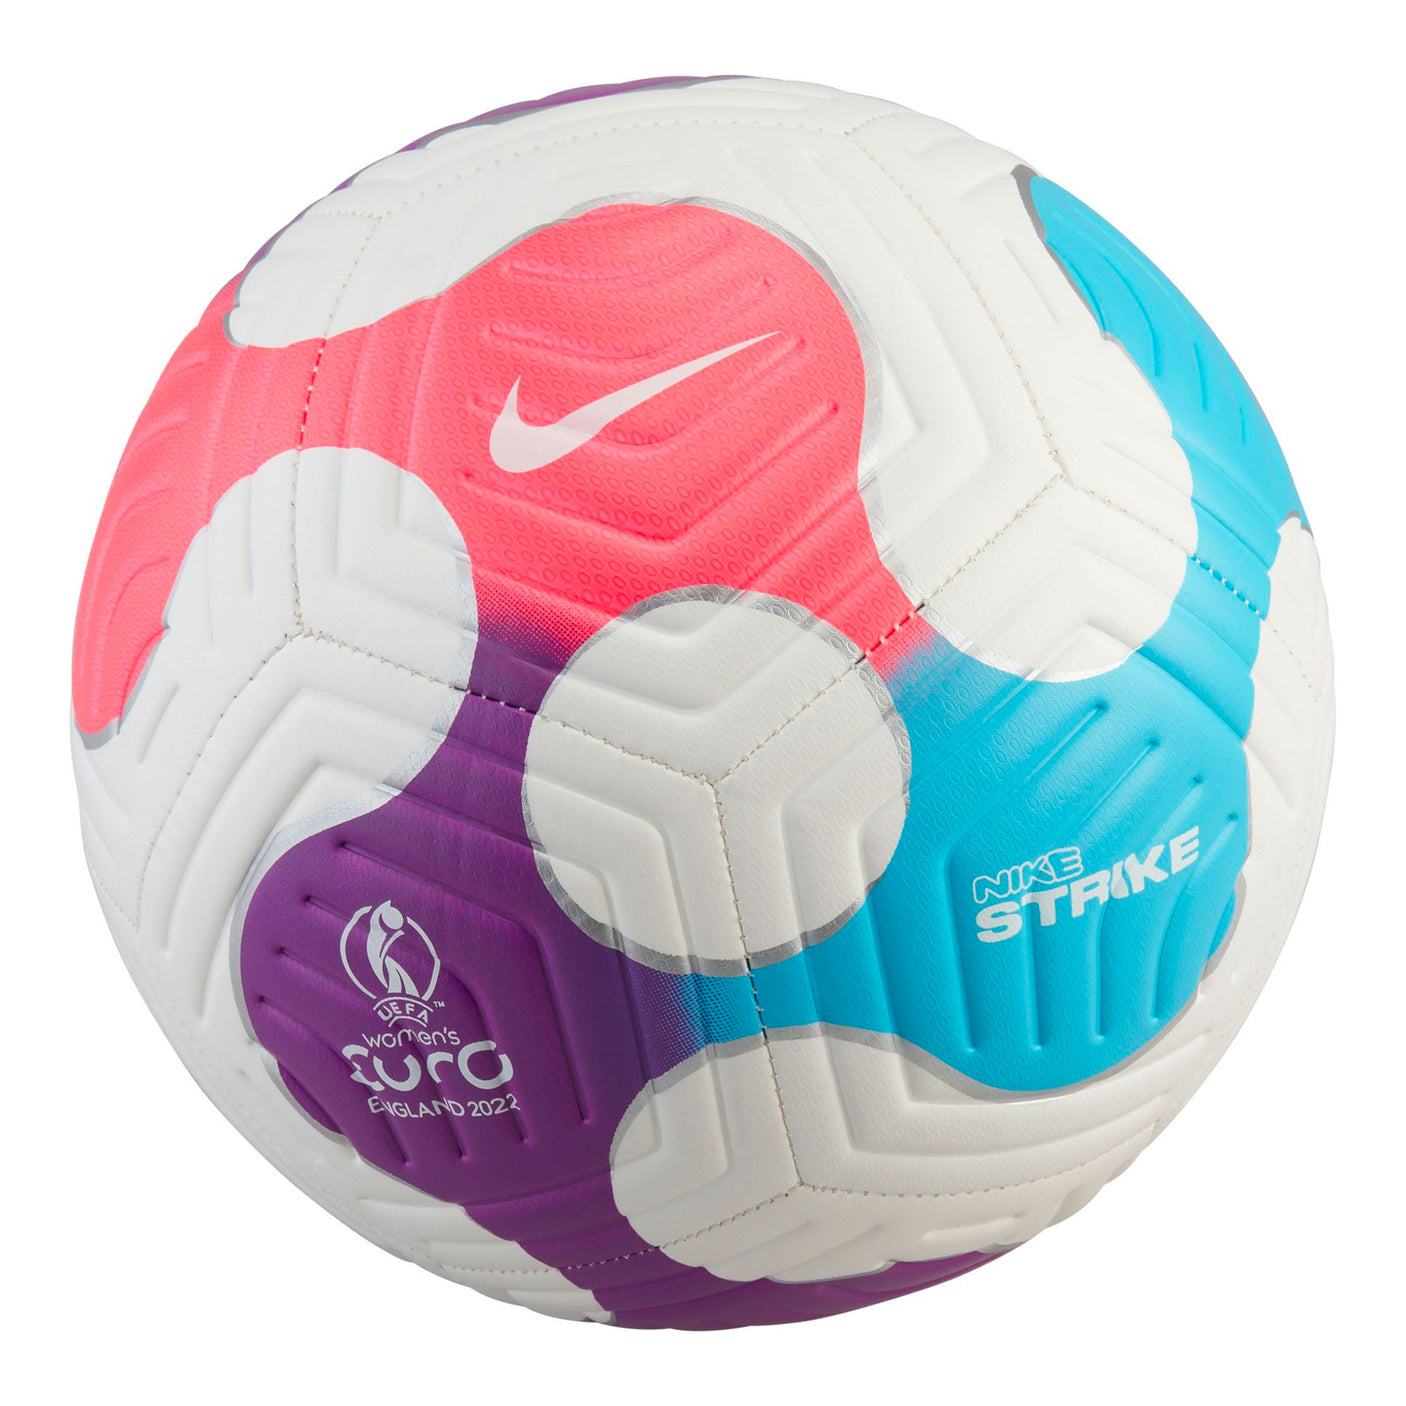 The new 2023-24 La Liga ball and 16 of the best match balls ever